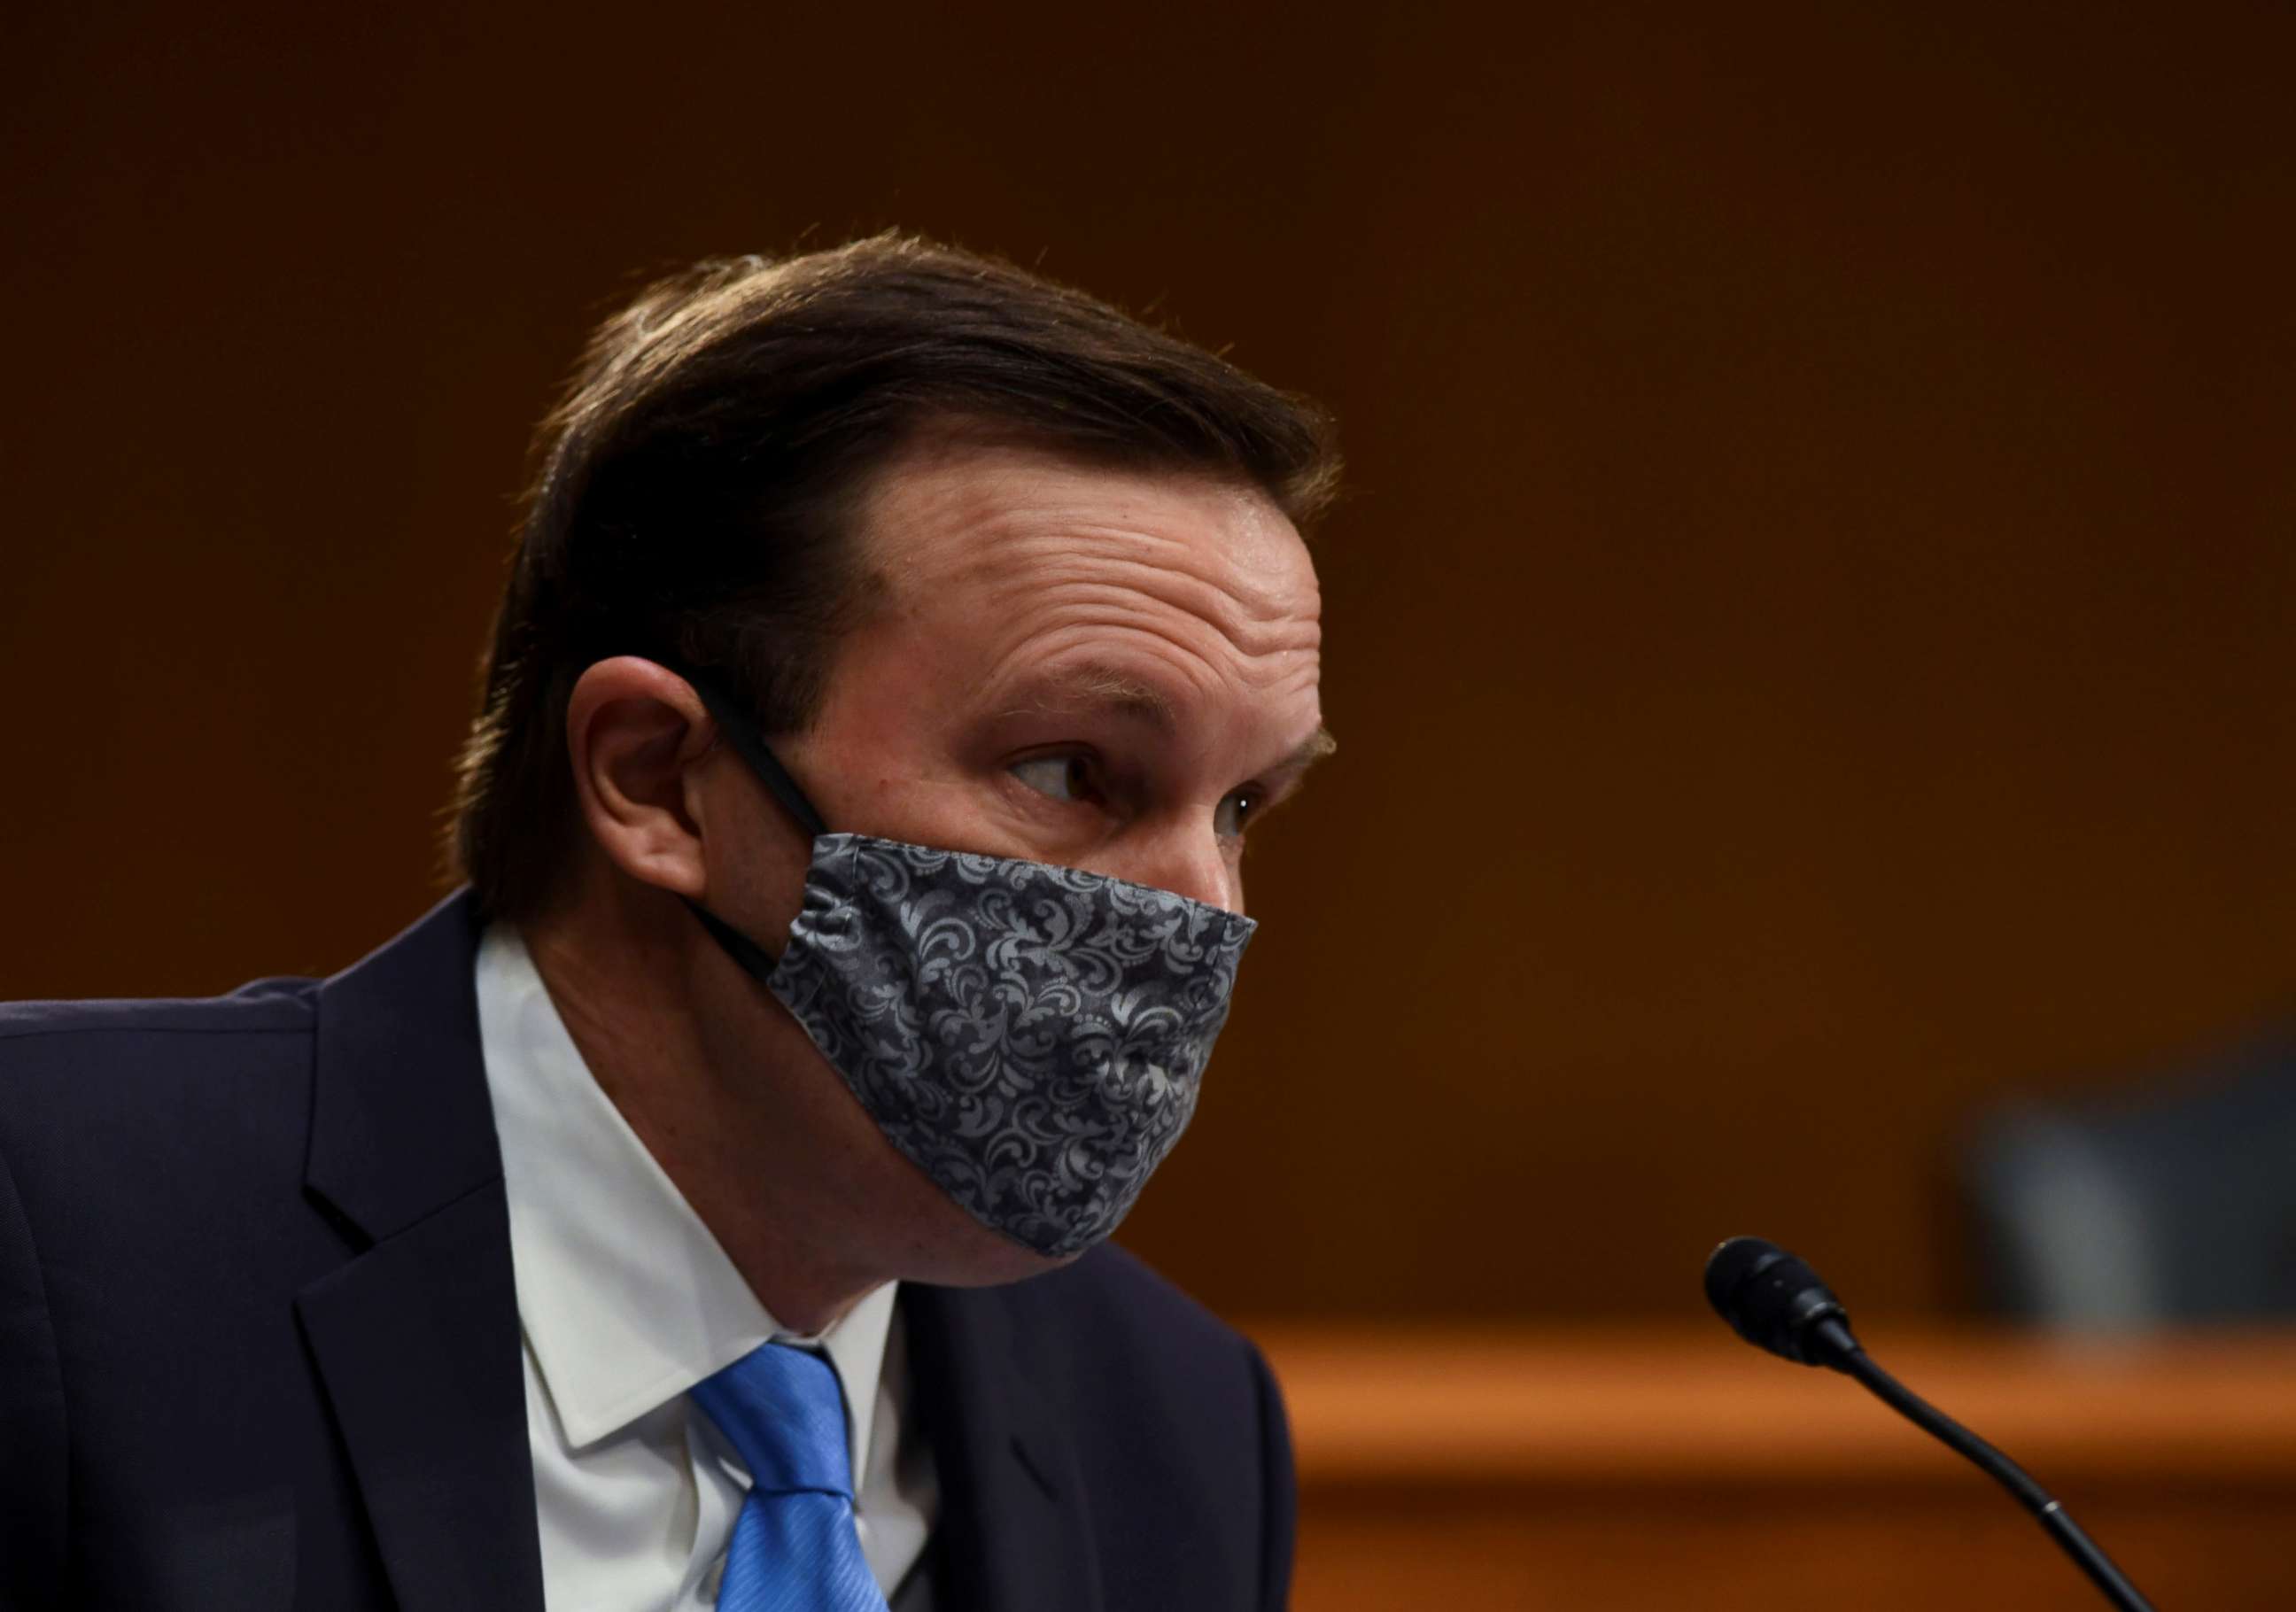 PHOTO: Senator Chris Murphy listens to testimony during the Senate Committee for Health, Education, Labor, and Pensions hearing on the coronavirus disease (COVID-19), in Washington, May 12, 2020.